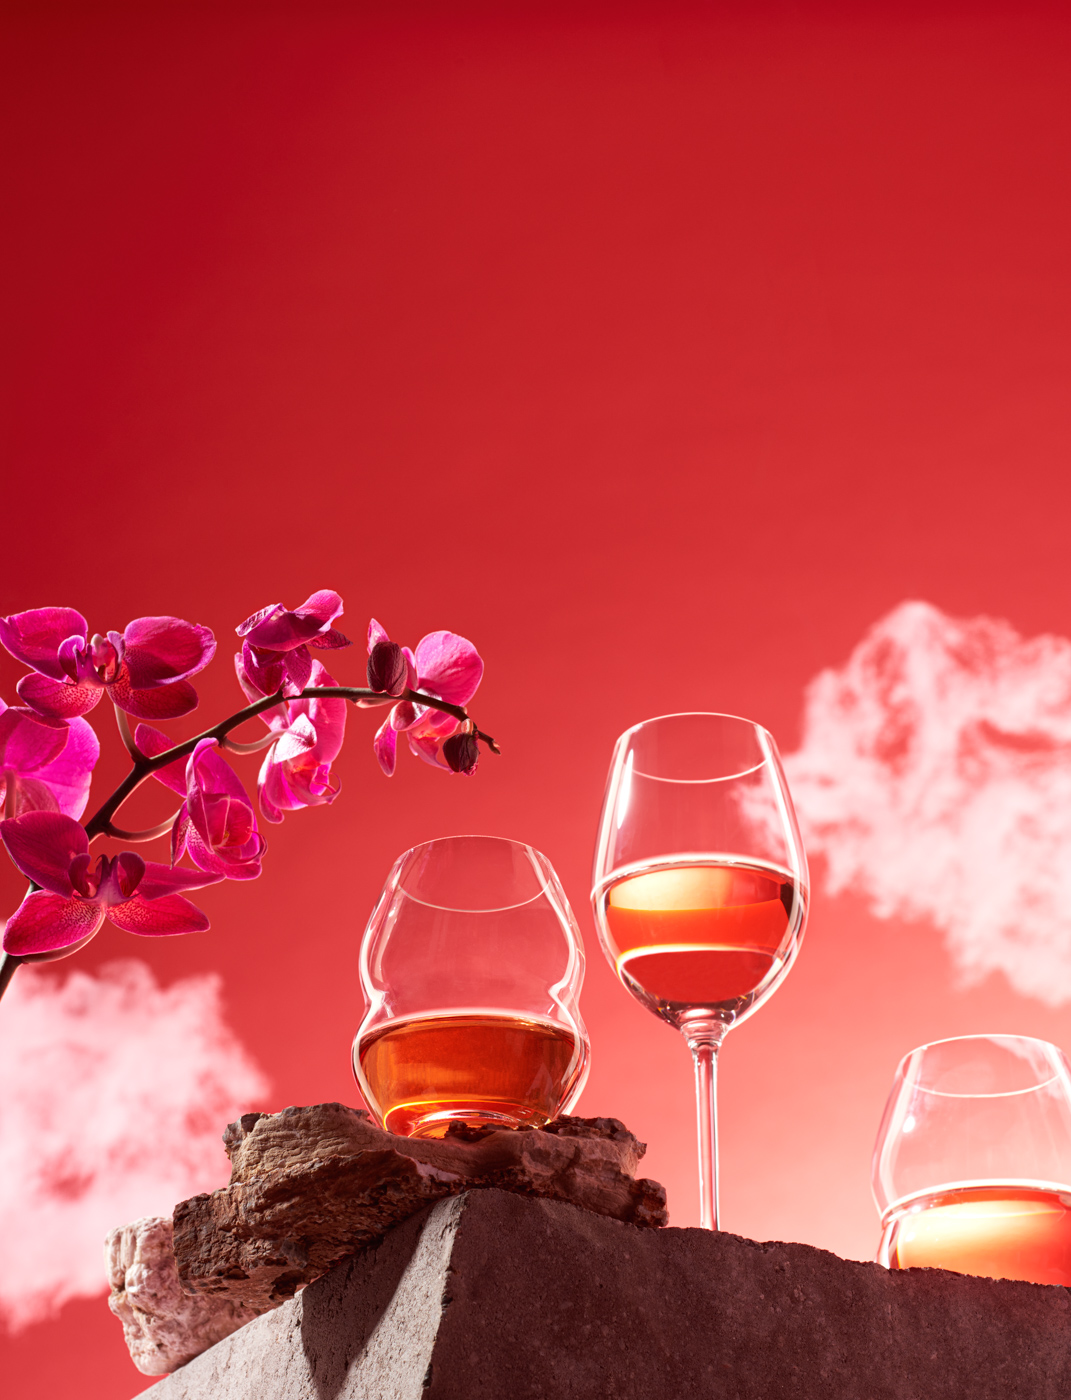 three_rose_wine_glasses_on_a_cliff_and_red_cloudy_sky_with_fuchsia_Orchidea_flower_by_Elina_Himanen